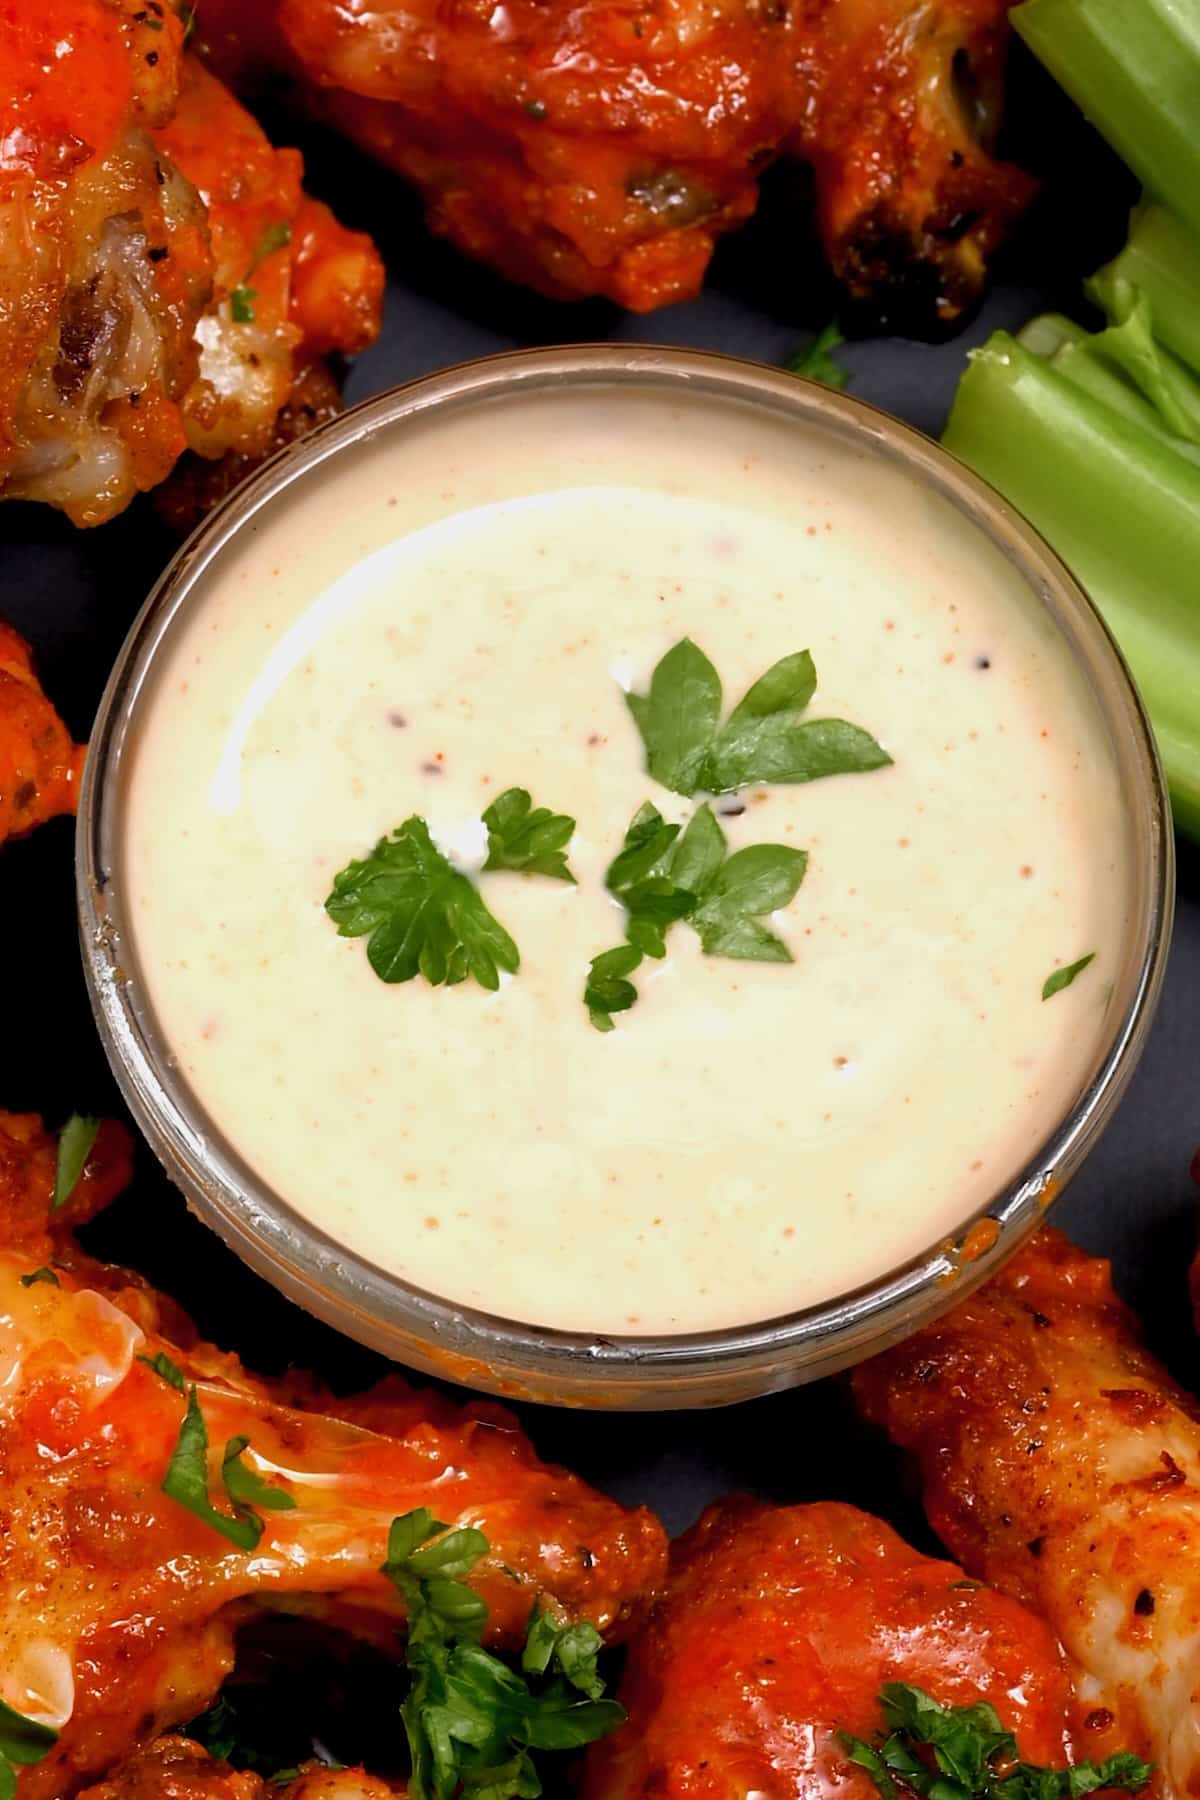 Alabama white sauce in a small bowl with chicken wings